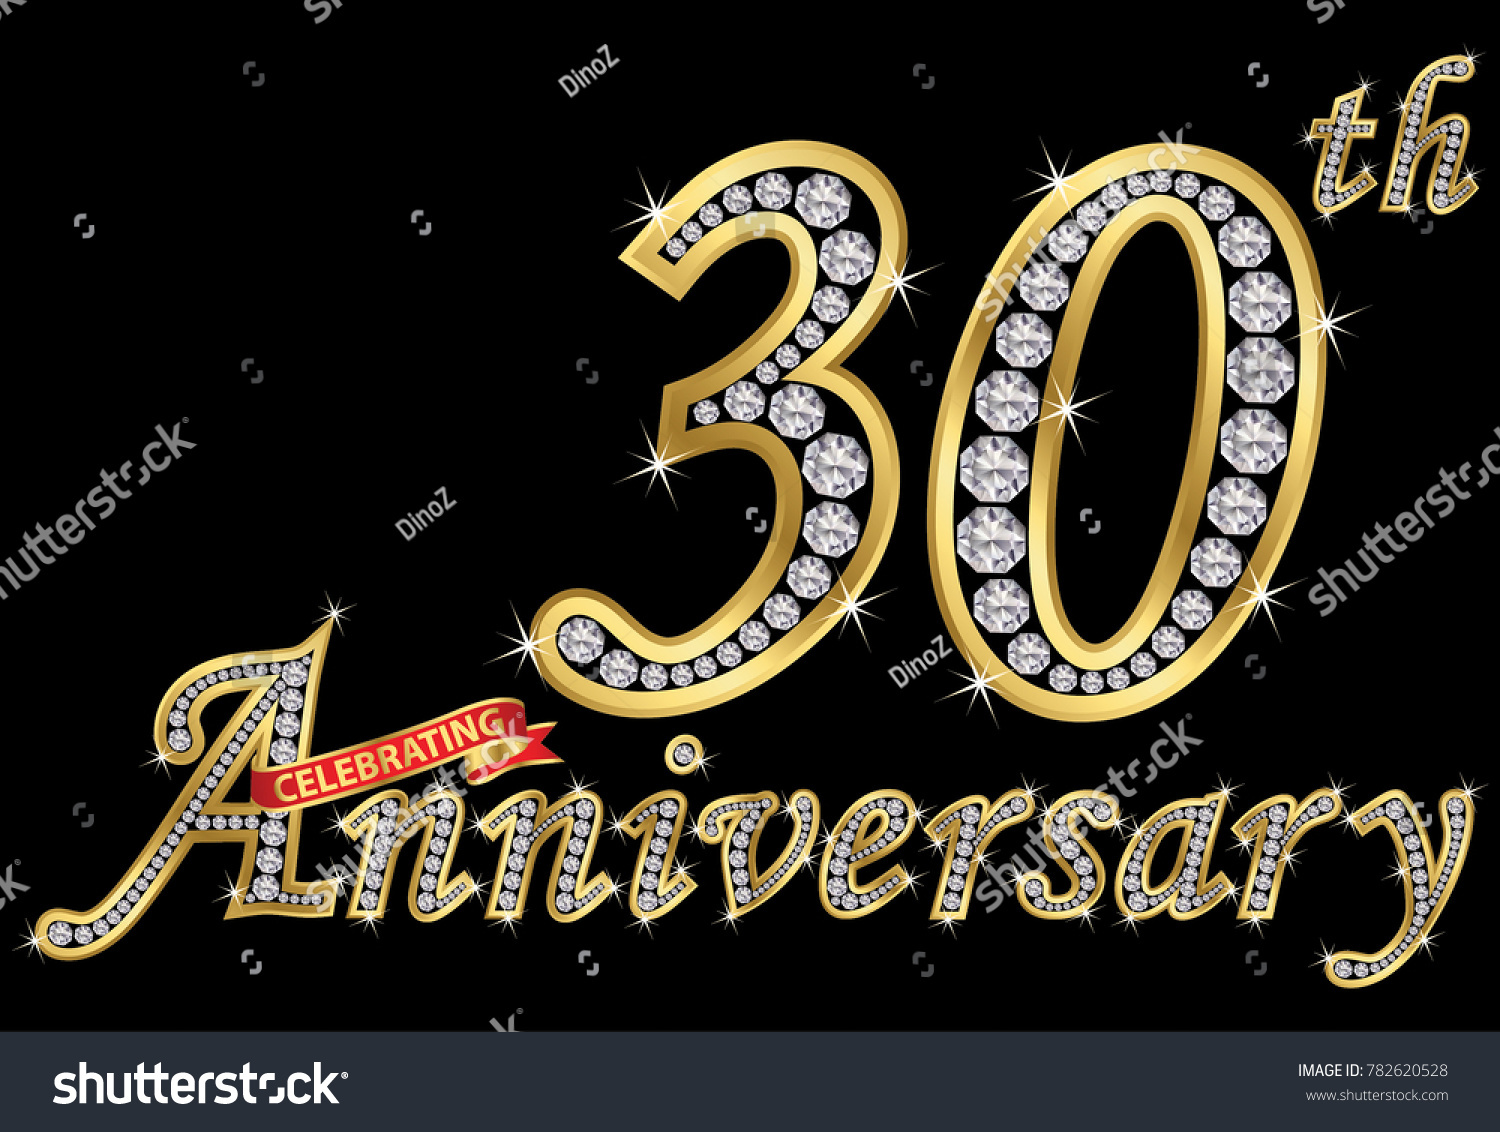 SVG of Celebrating 30 th anniversary golden sign with diamonds, vector illustration svg